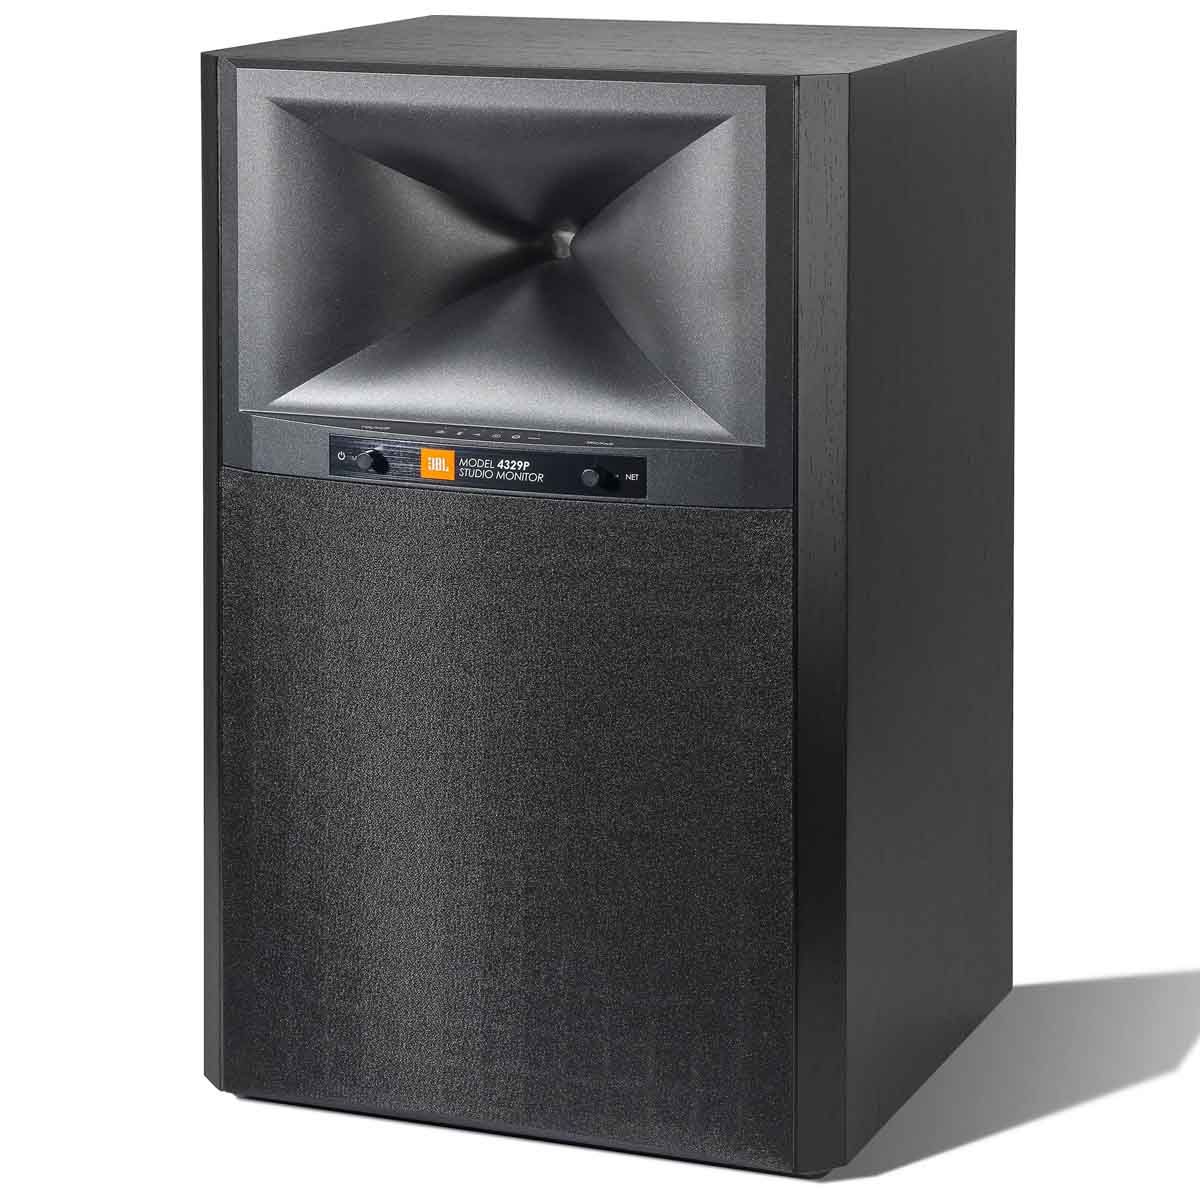 JBL 4329P Powered Studio Monitor - Pair - black angled front right view with grille